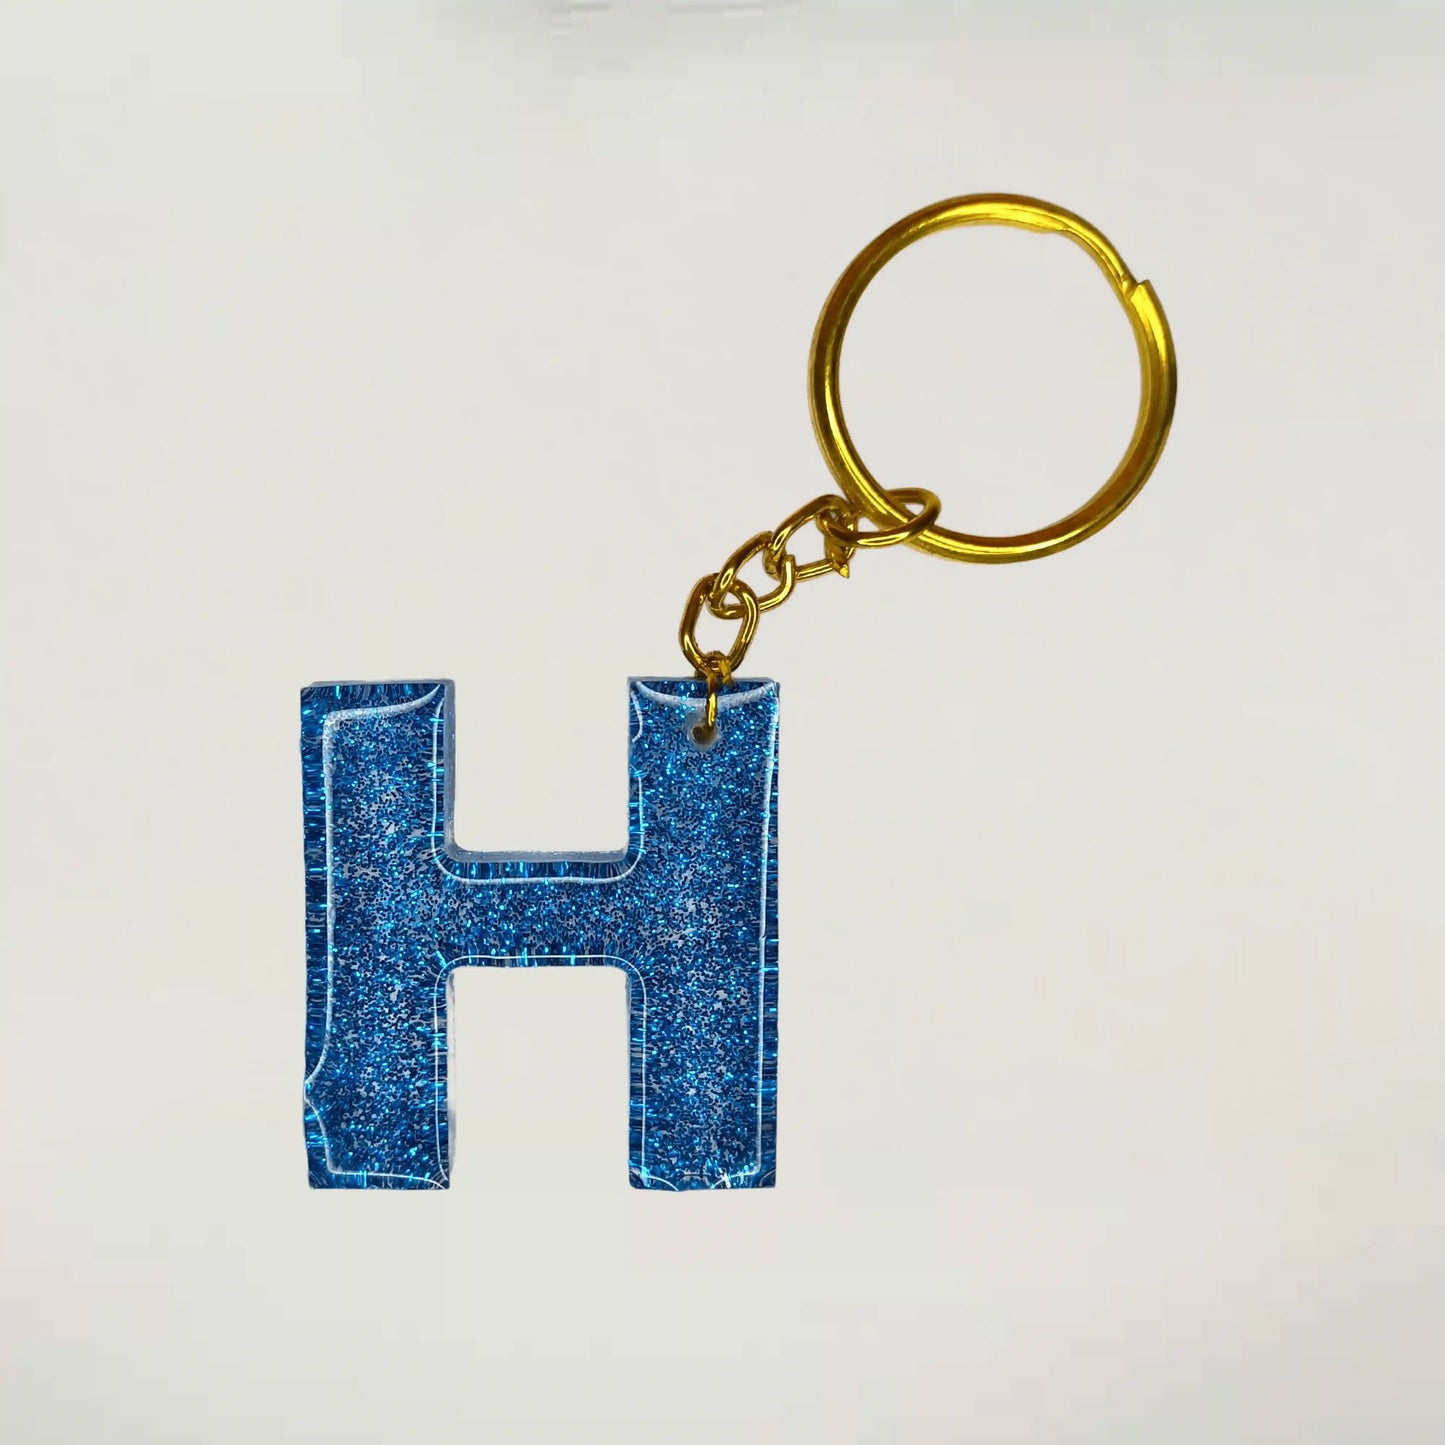 Shop Customized blue Glitter Resin keychains with H initials For Friendship day